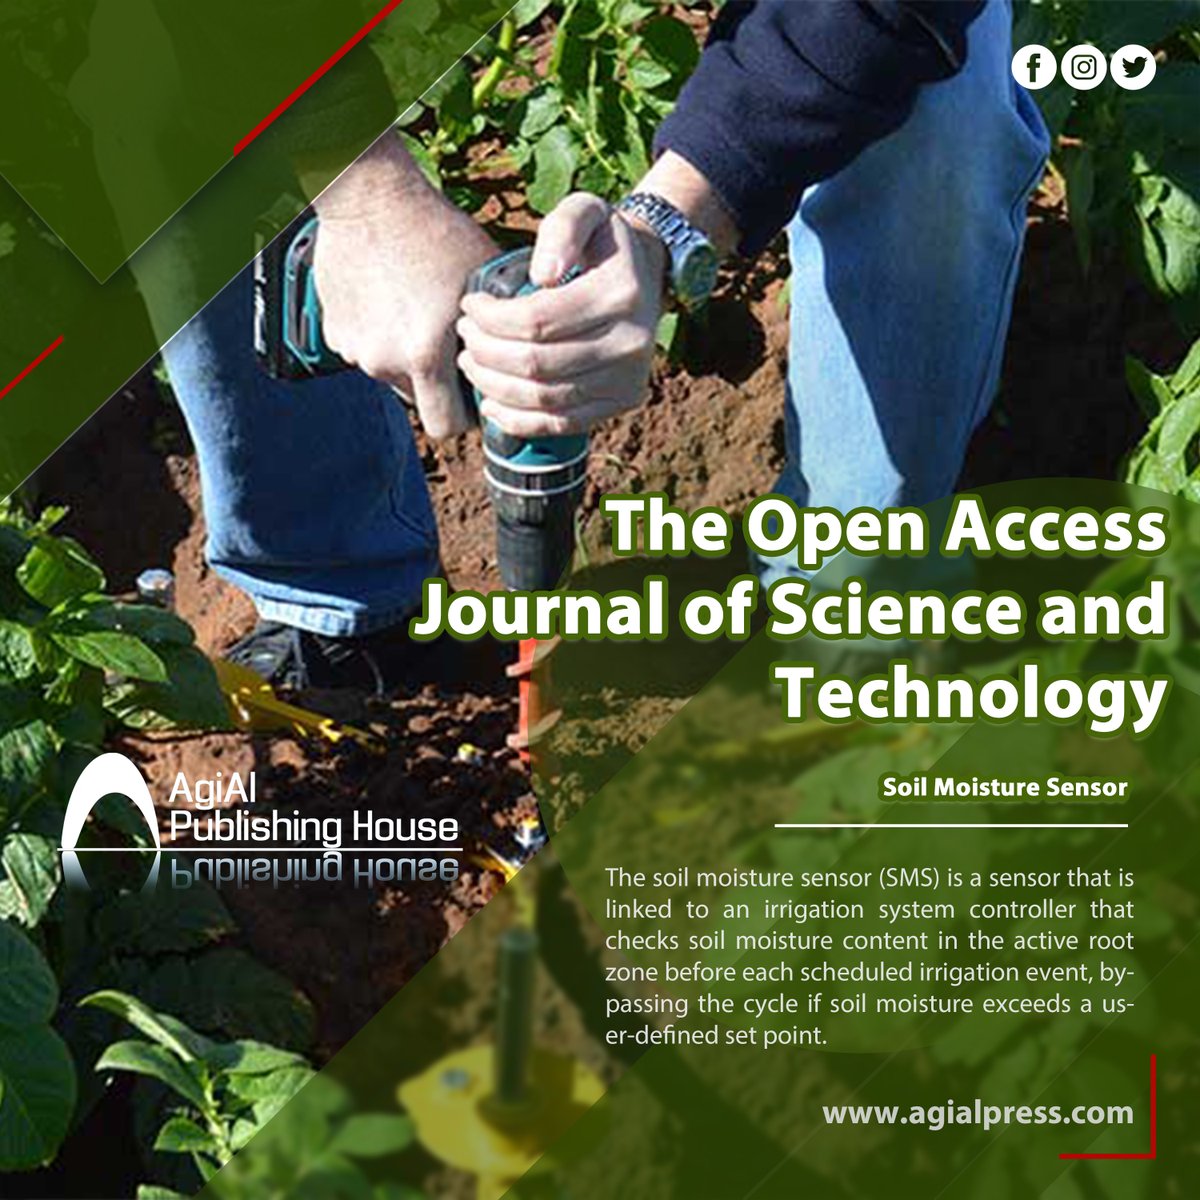 Soil moisture sensors do not directly detect water in the soil. They instead track changes in another soil parameter that is related to water content in a predictable fashion.

Articles on this topic are Welcome.

 #research #soilmoisture  #soiltesting #soilhealth #soilscience